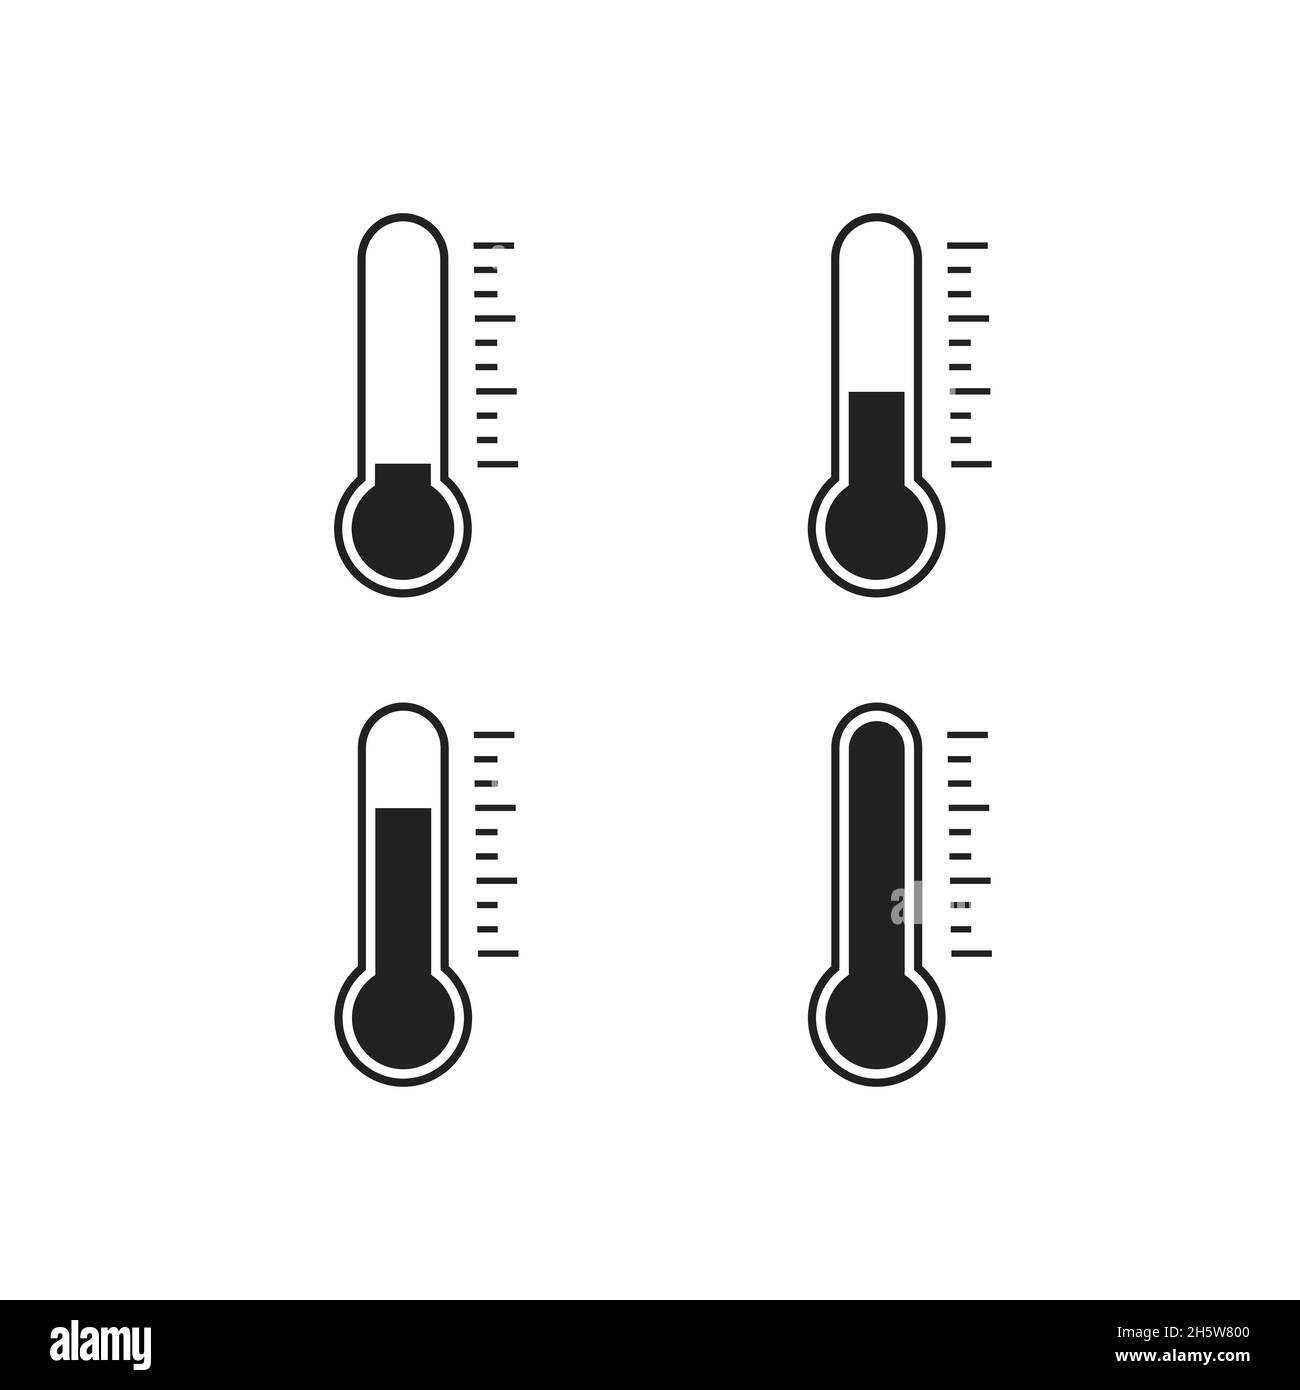 https://c8.alamy.com/comp/2H5W800/thermometer-hot-and-cold-vector-set-icon-in-flat-weather-element-illustration-for-web-2H5W800.jpg